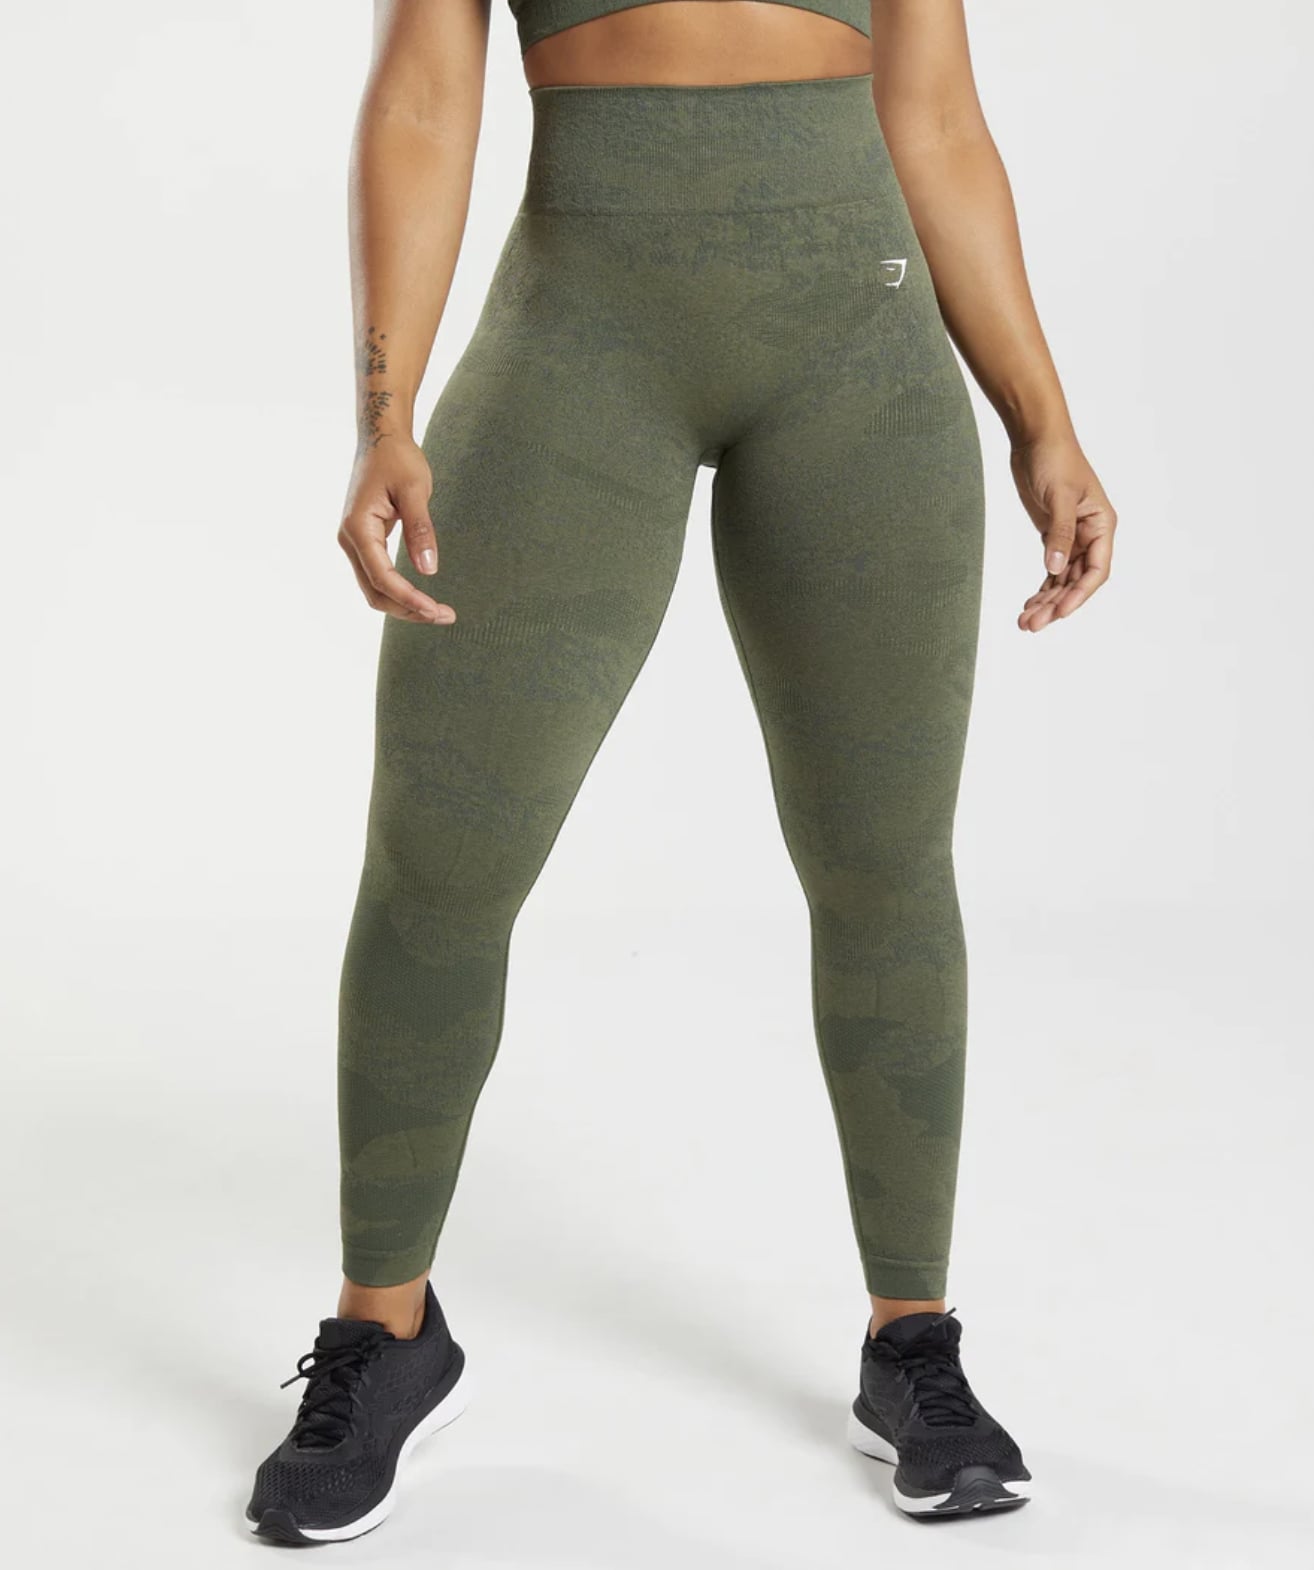 Gym Shark Dupe Crop Top Green - $20 (13% Off Retail) - From Paige